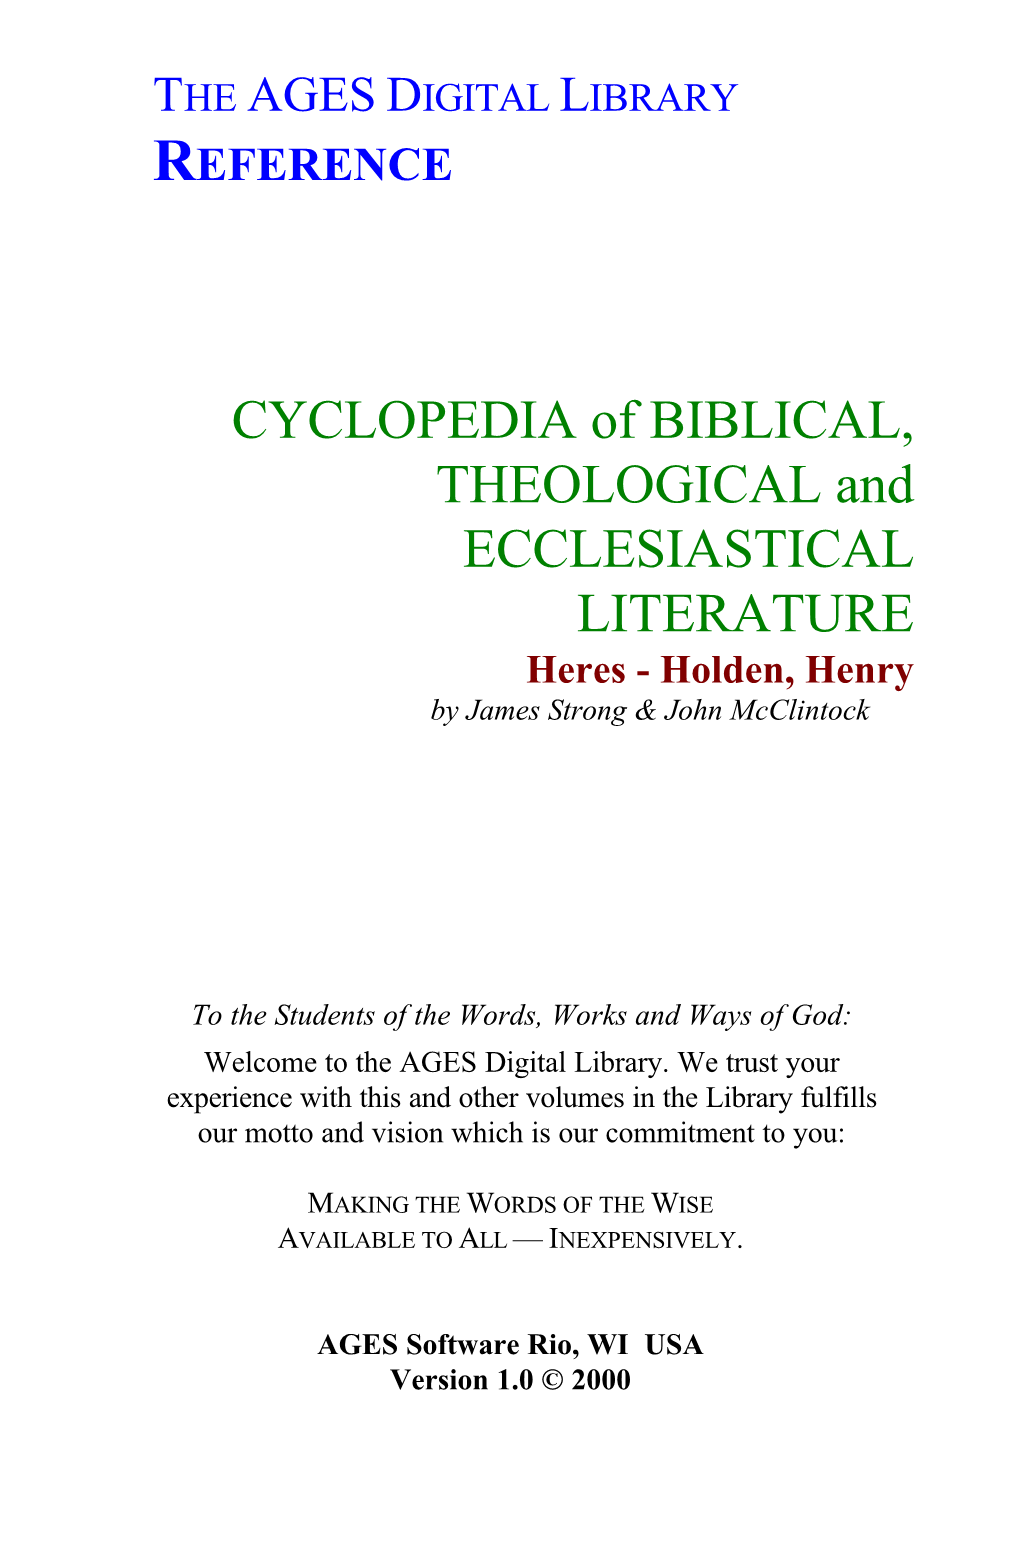 CYCLOPEDIA of BIBLICAL, THEOLOGICAL and ECCLESIASTICAL LITERATURE Heres - Holden, Henry by James Strong & John Mcclintock